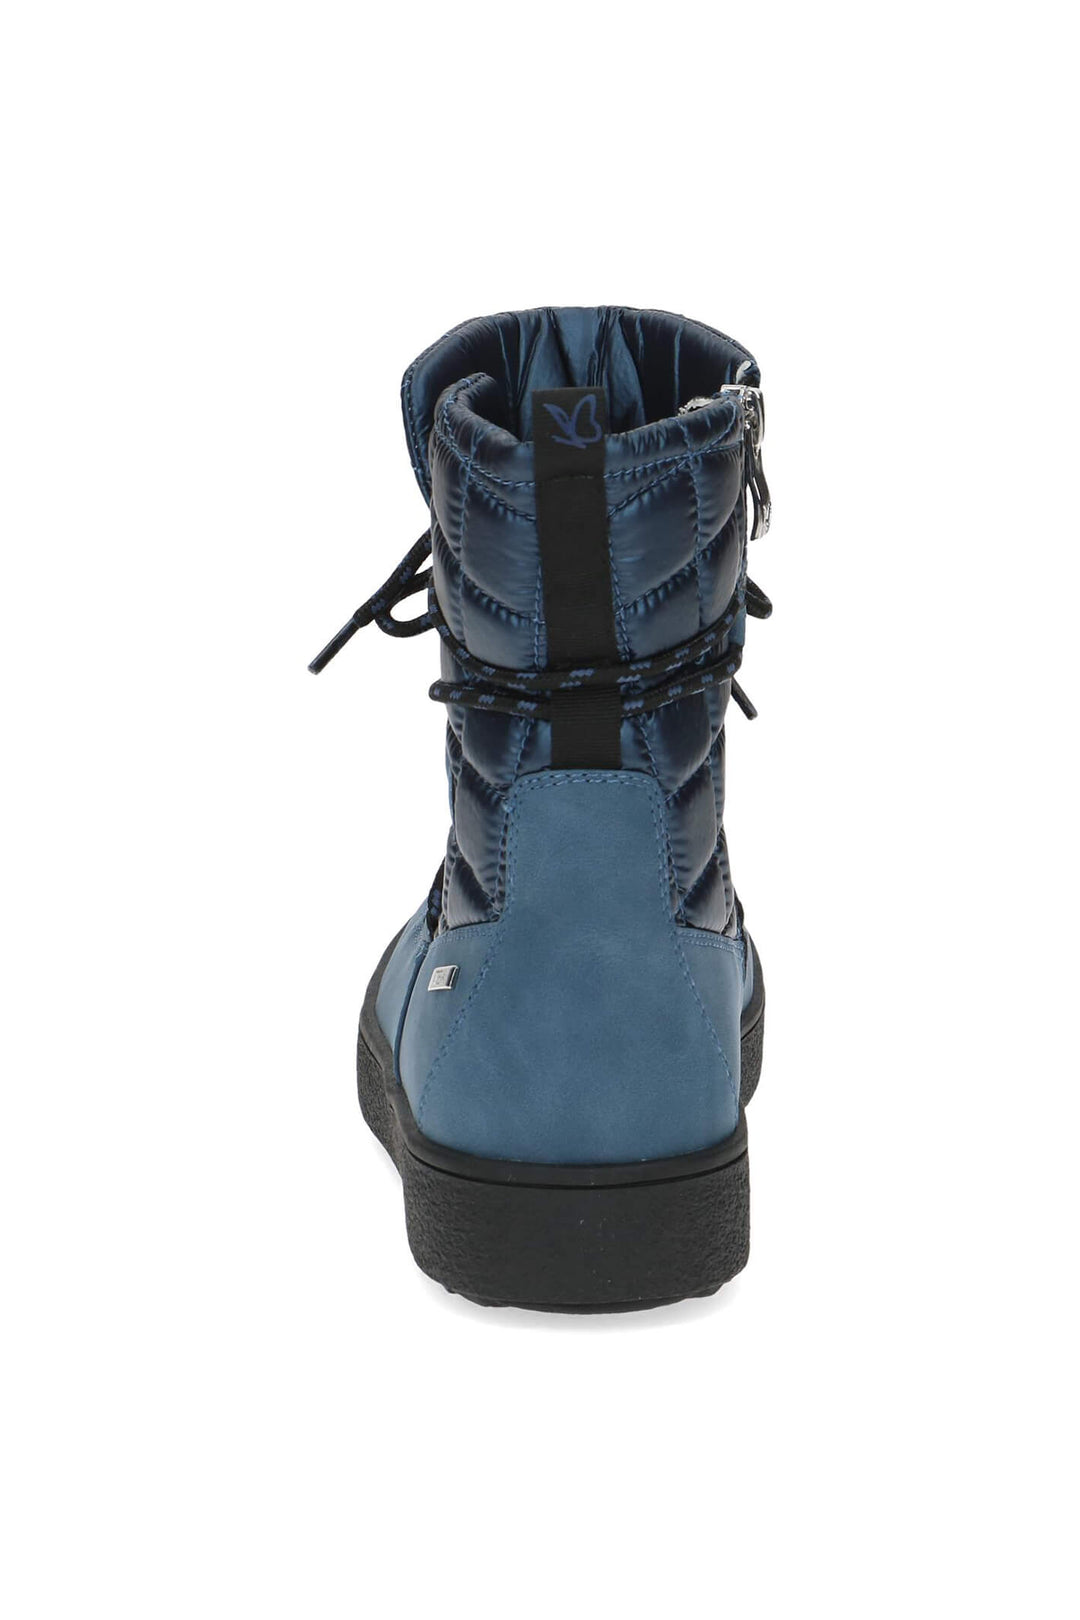 Caprice Anika 26215 Ocean Navy Waterproof Snow Boots - Experience Boutique